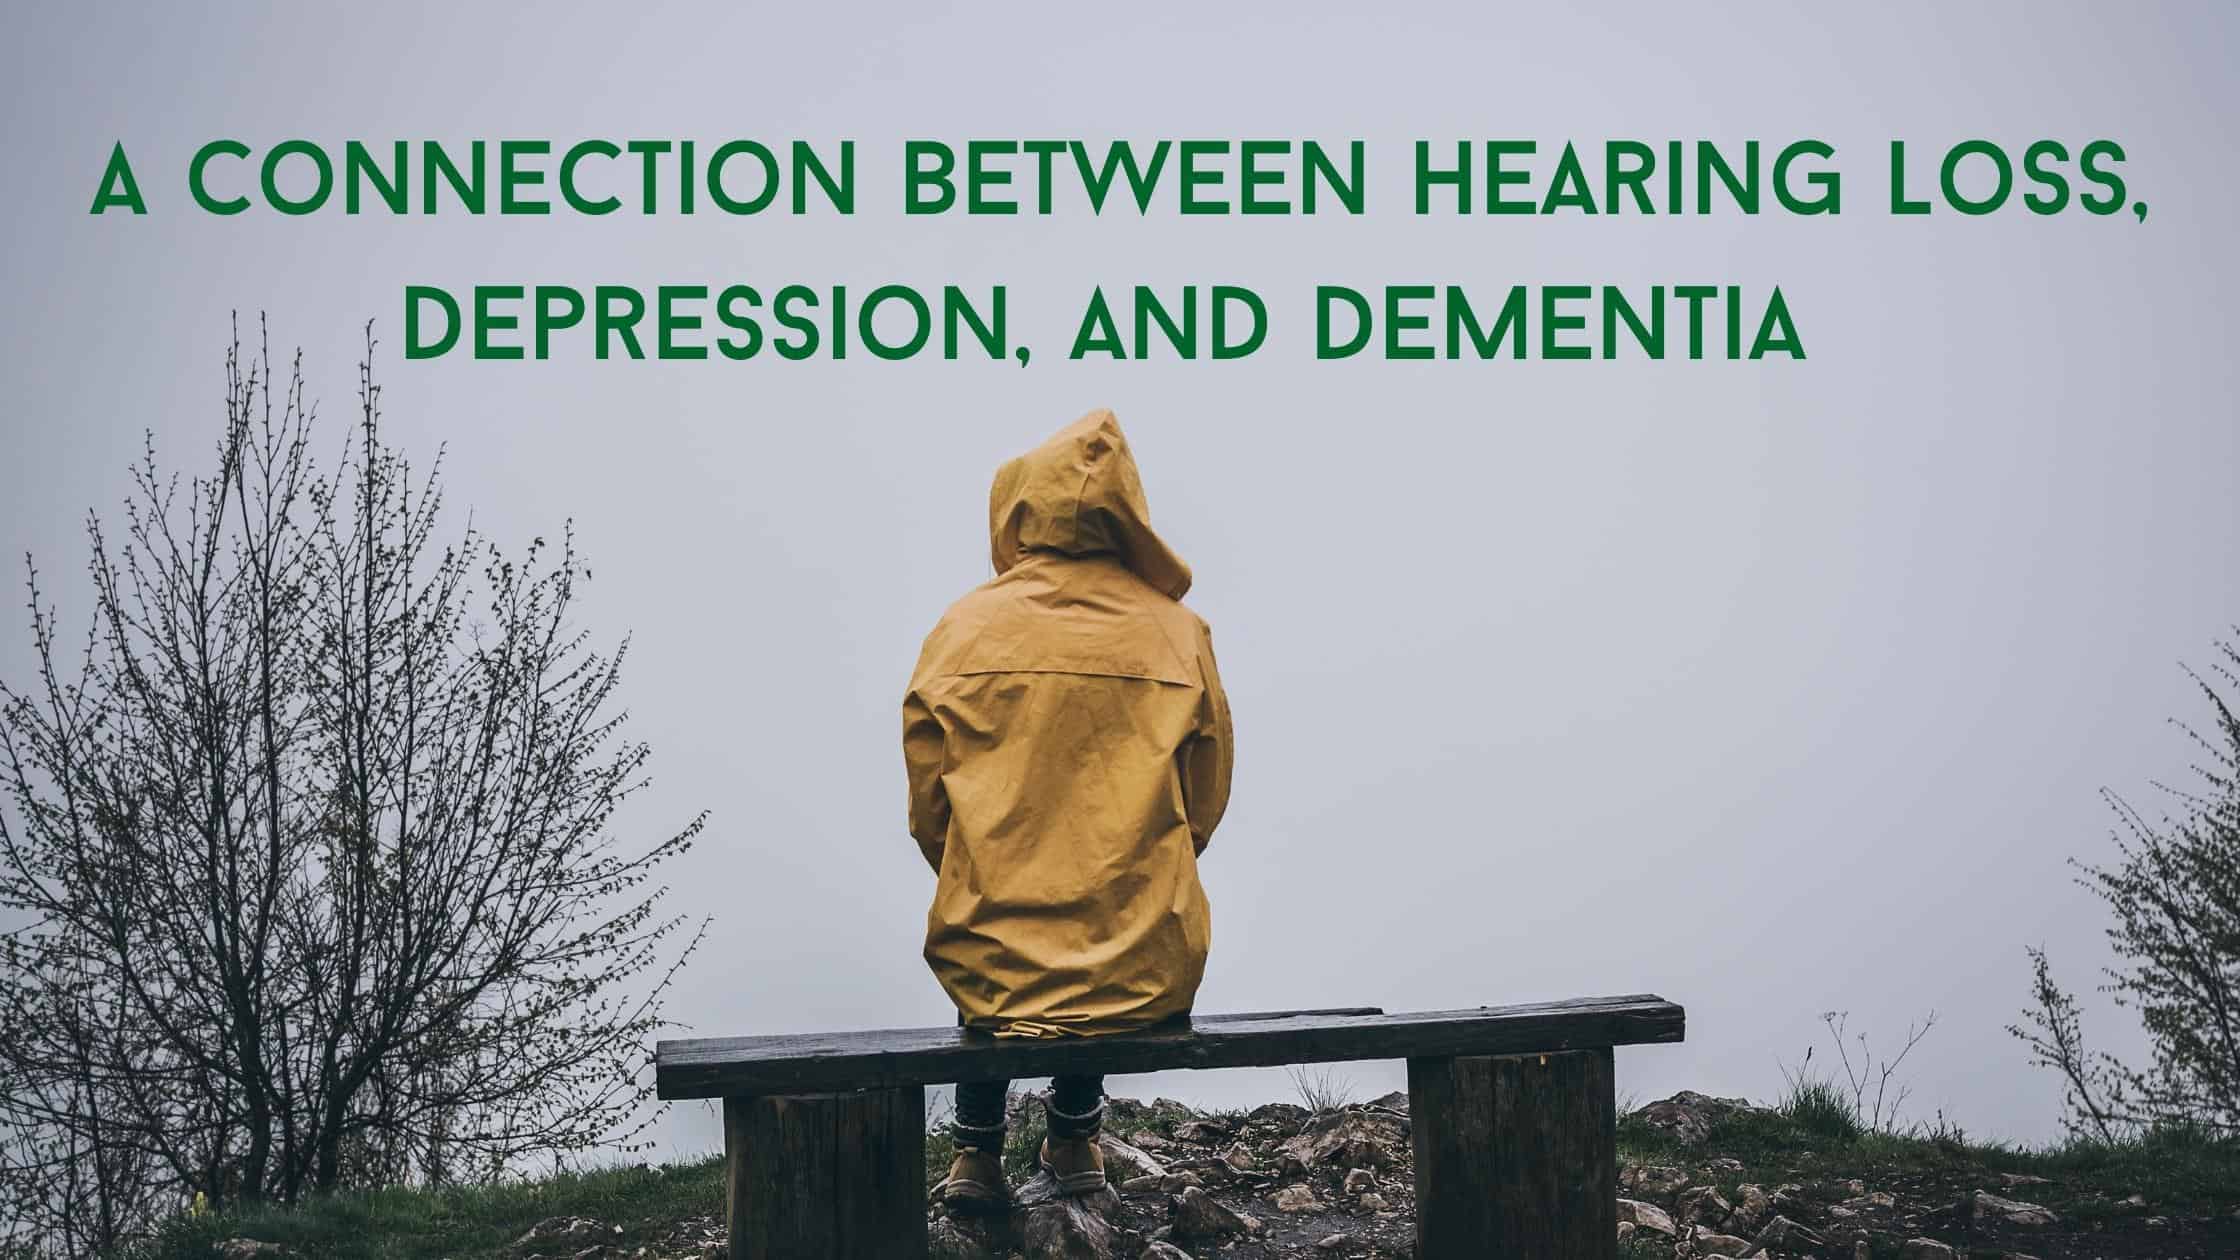 Featured image for “A Connection between Hearing Loss, Depression, and Dementia”